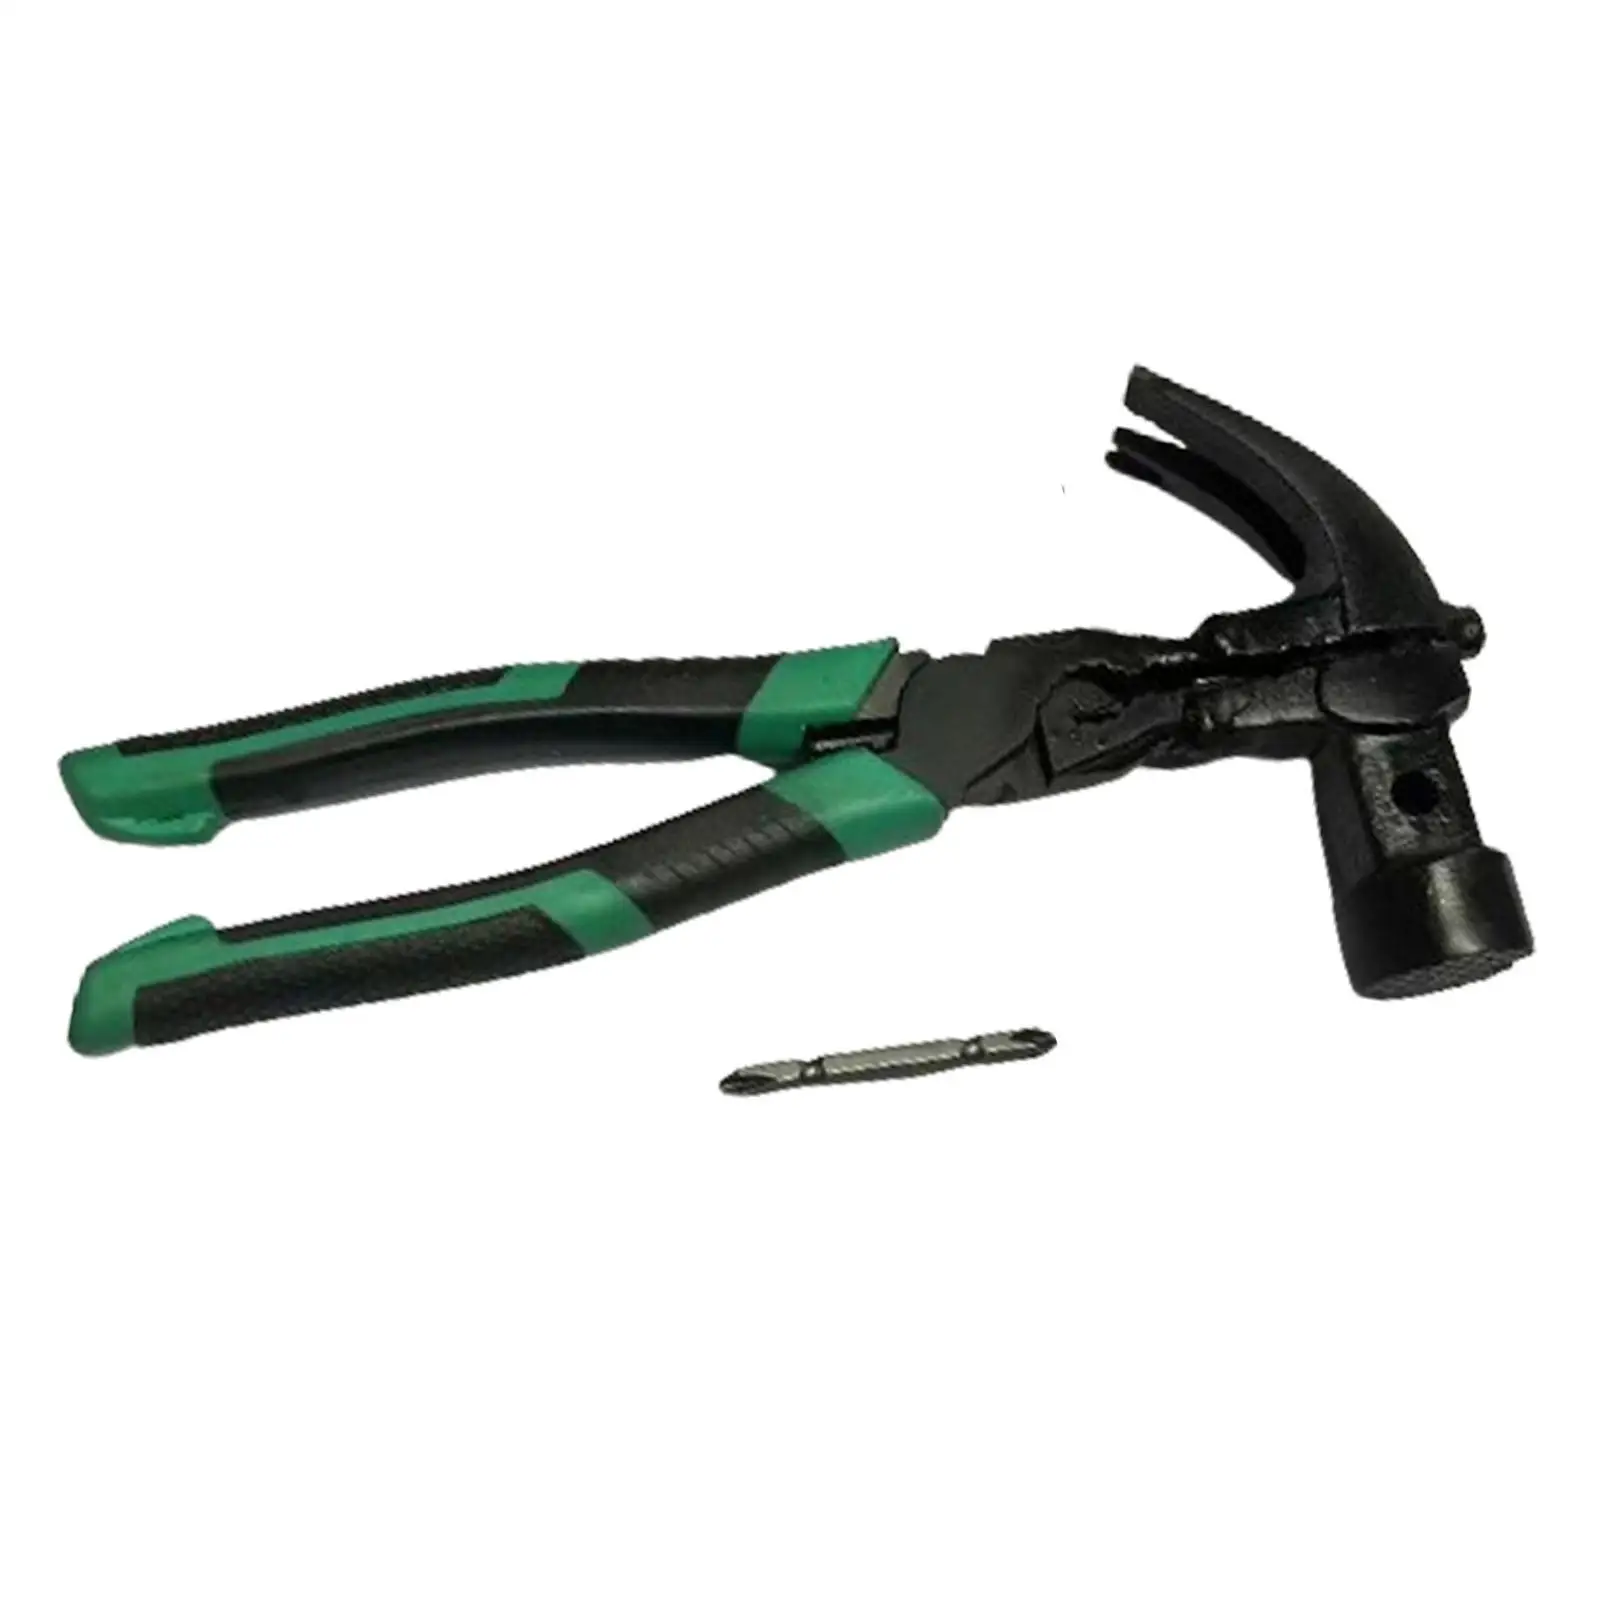 

Multipurpose Tool Compact Ergonomic Handle with Screwdriver Bit Accessories Practical Pliers for Workshop Auto Parts Home Repair